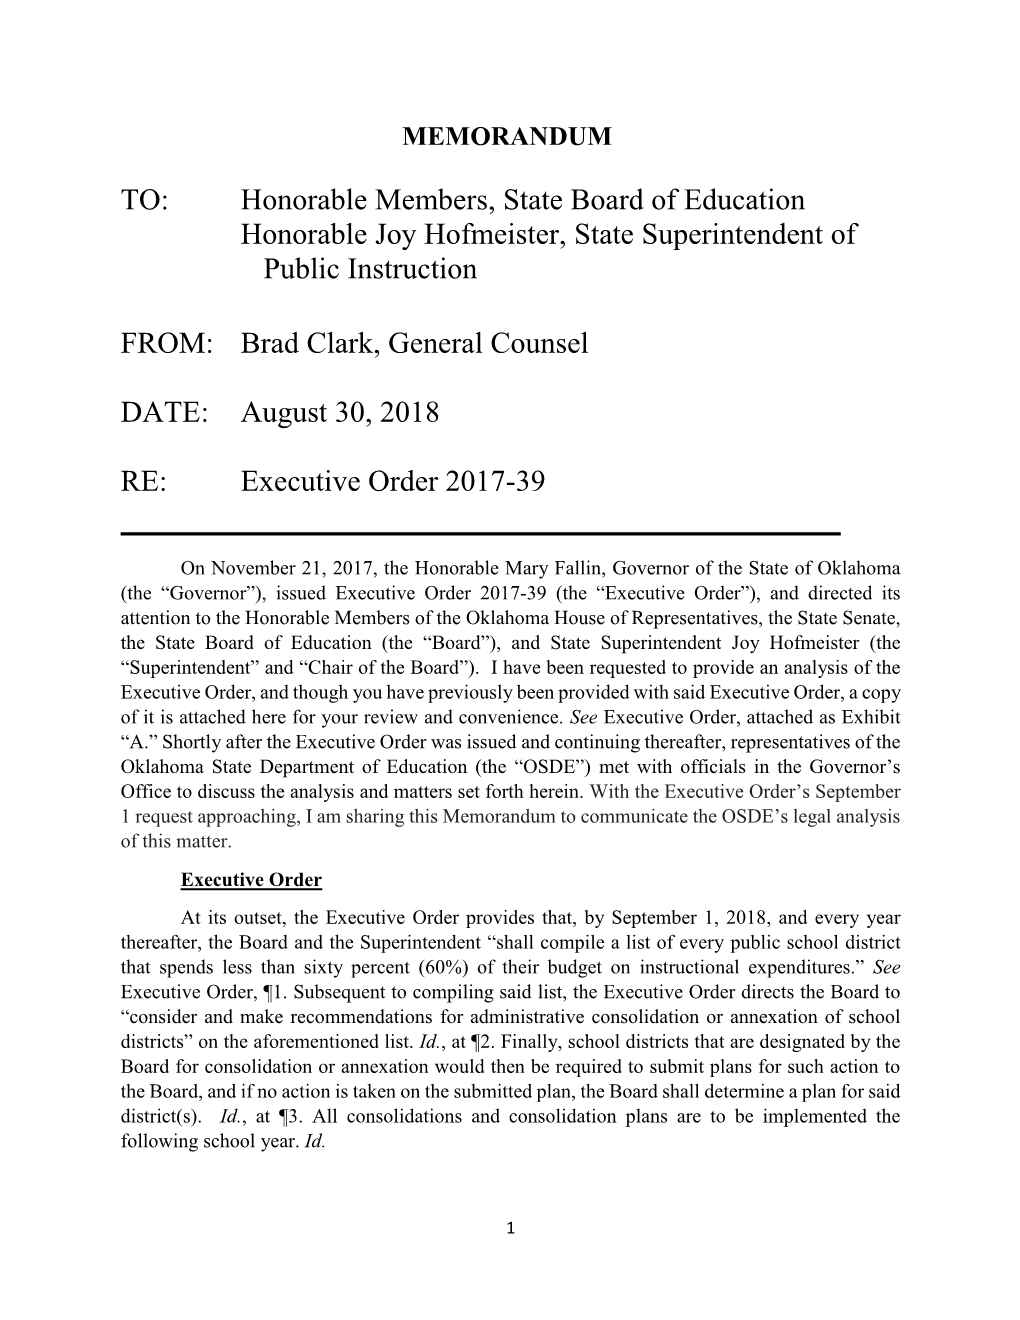 Memo from State Board of Education Attorney